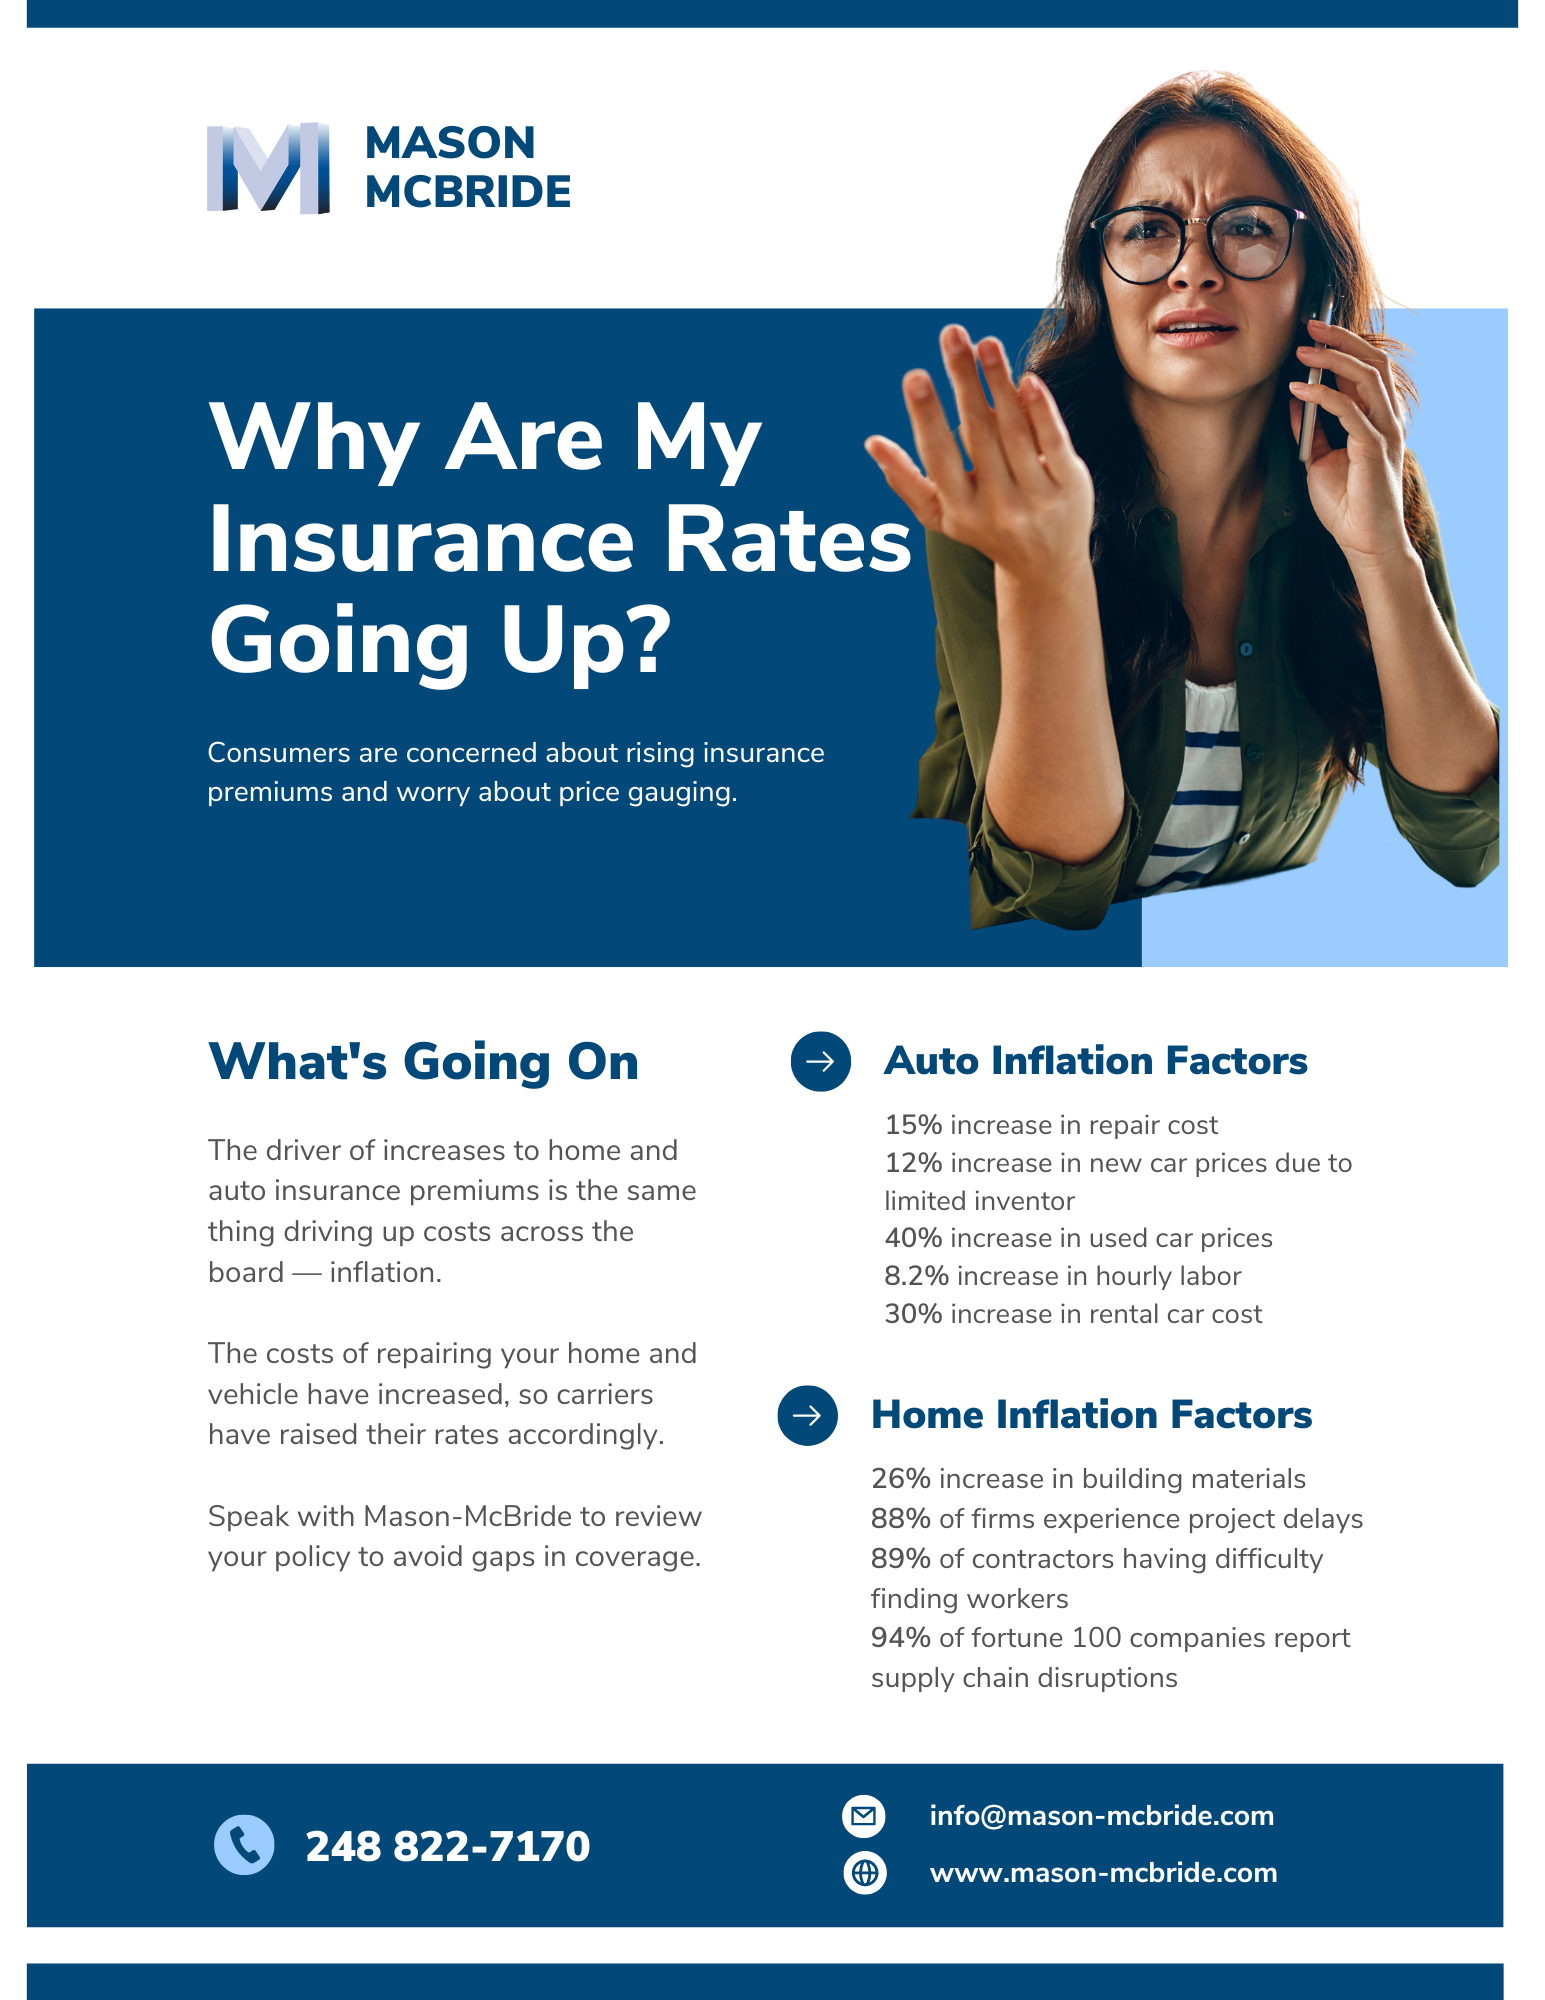 Inflation's Impact on Home and Auto Insurance - Mason McBride